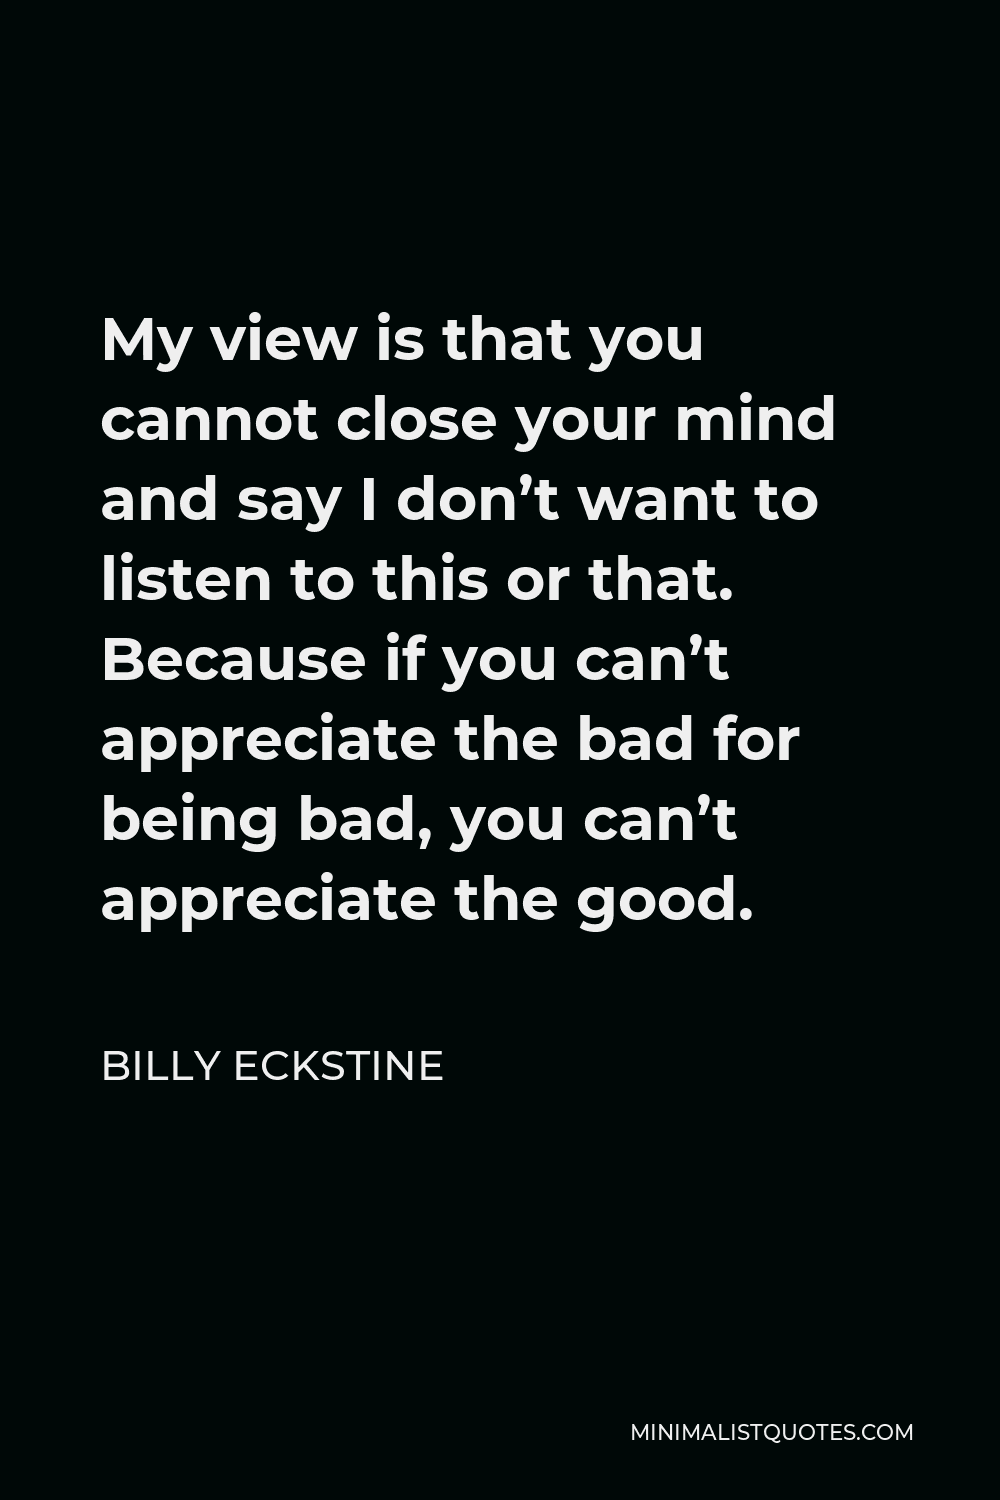 Billy Eckstine Quote - My view is that you cannot close your mind and say I don’t want to listen to this or that. Because if you can’t appreciate the bad for being bad, you can’t appreciate the good.